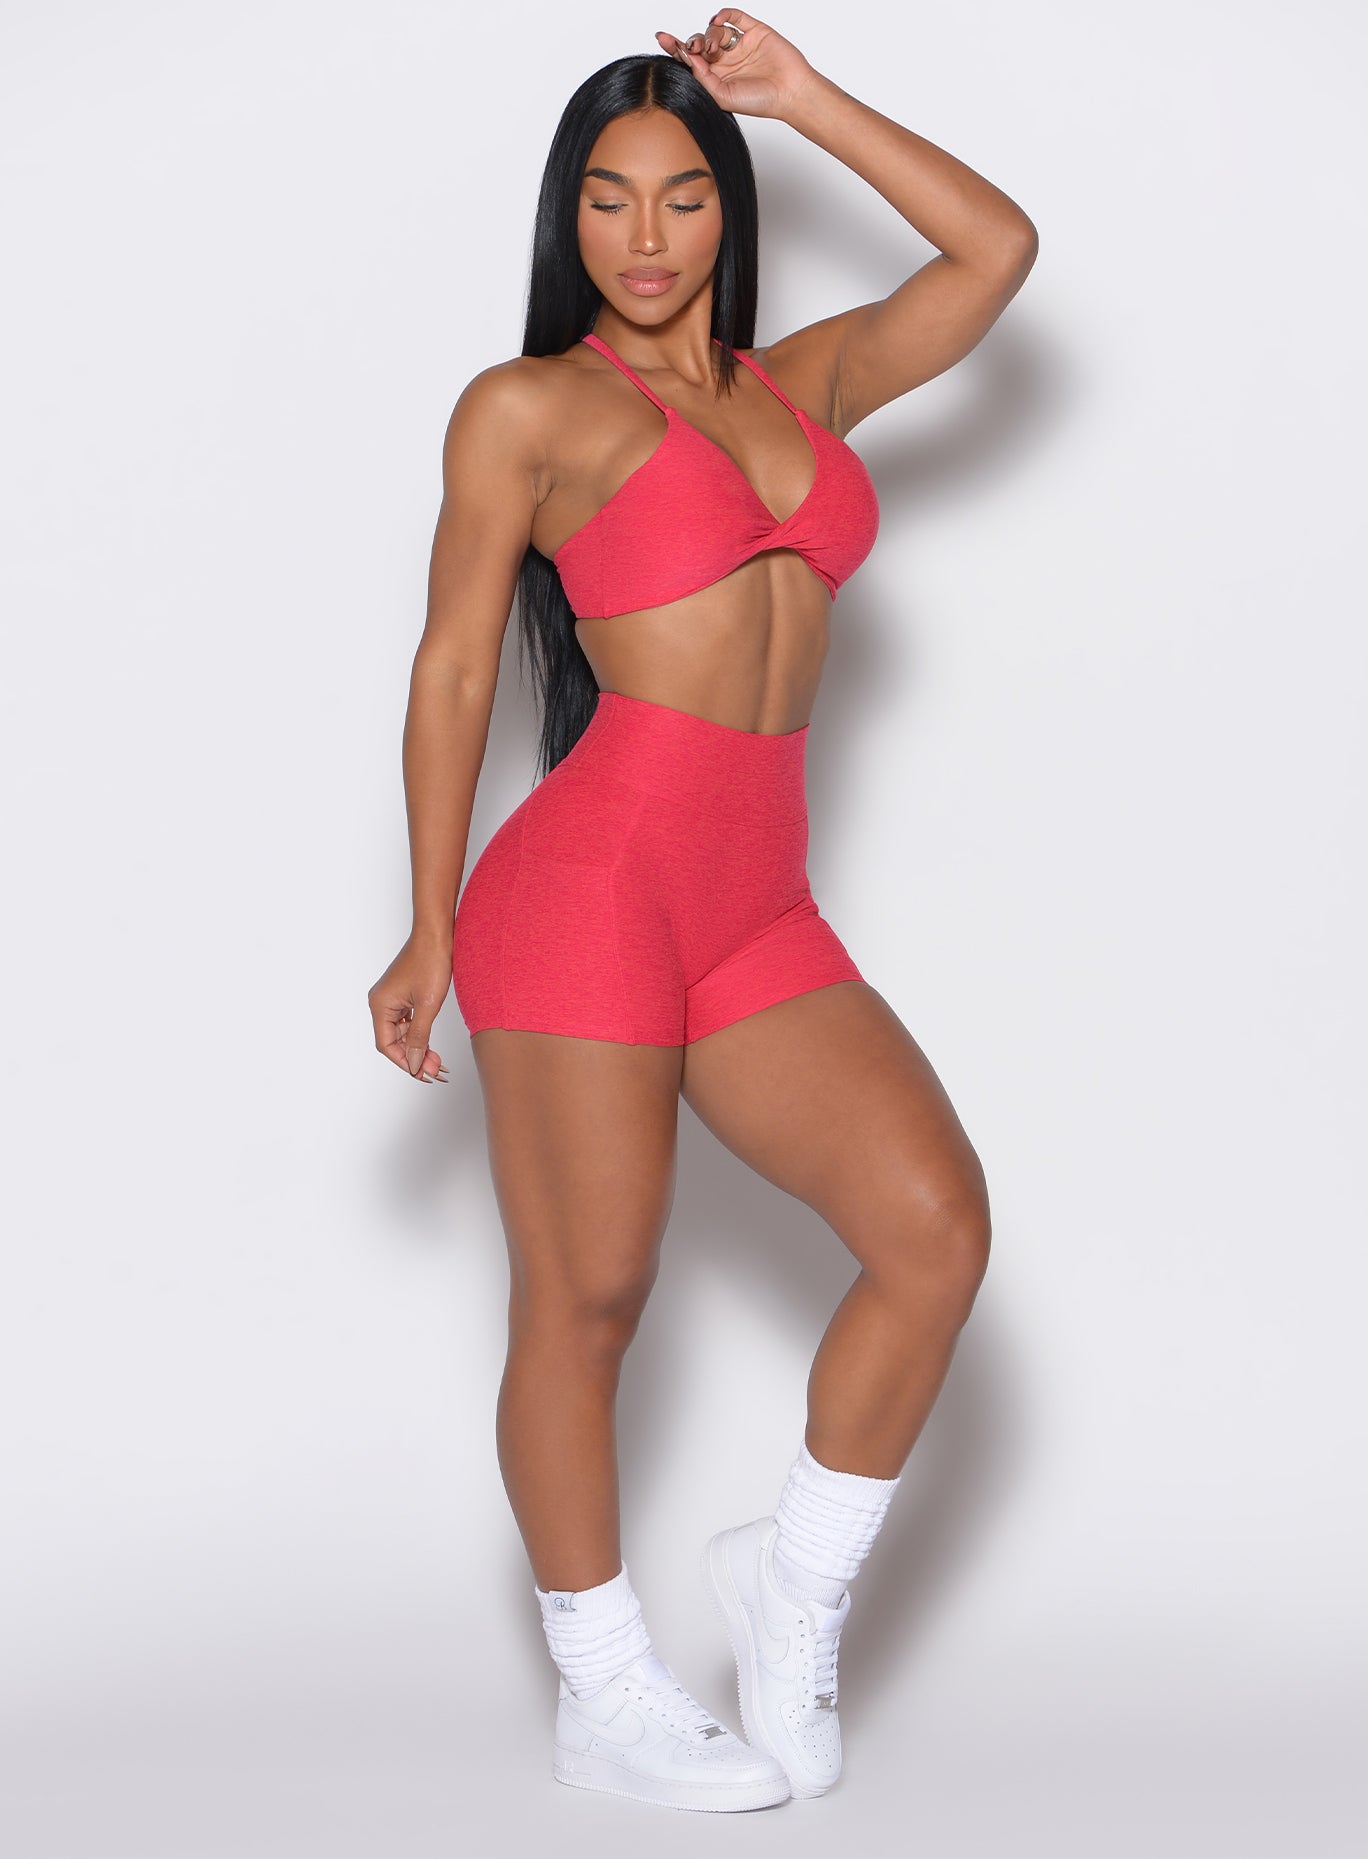 right side  profile view of a model wearing our scrunch shorts in Raspberry Punch color along with a matching bra